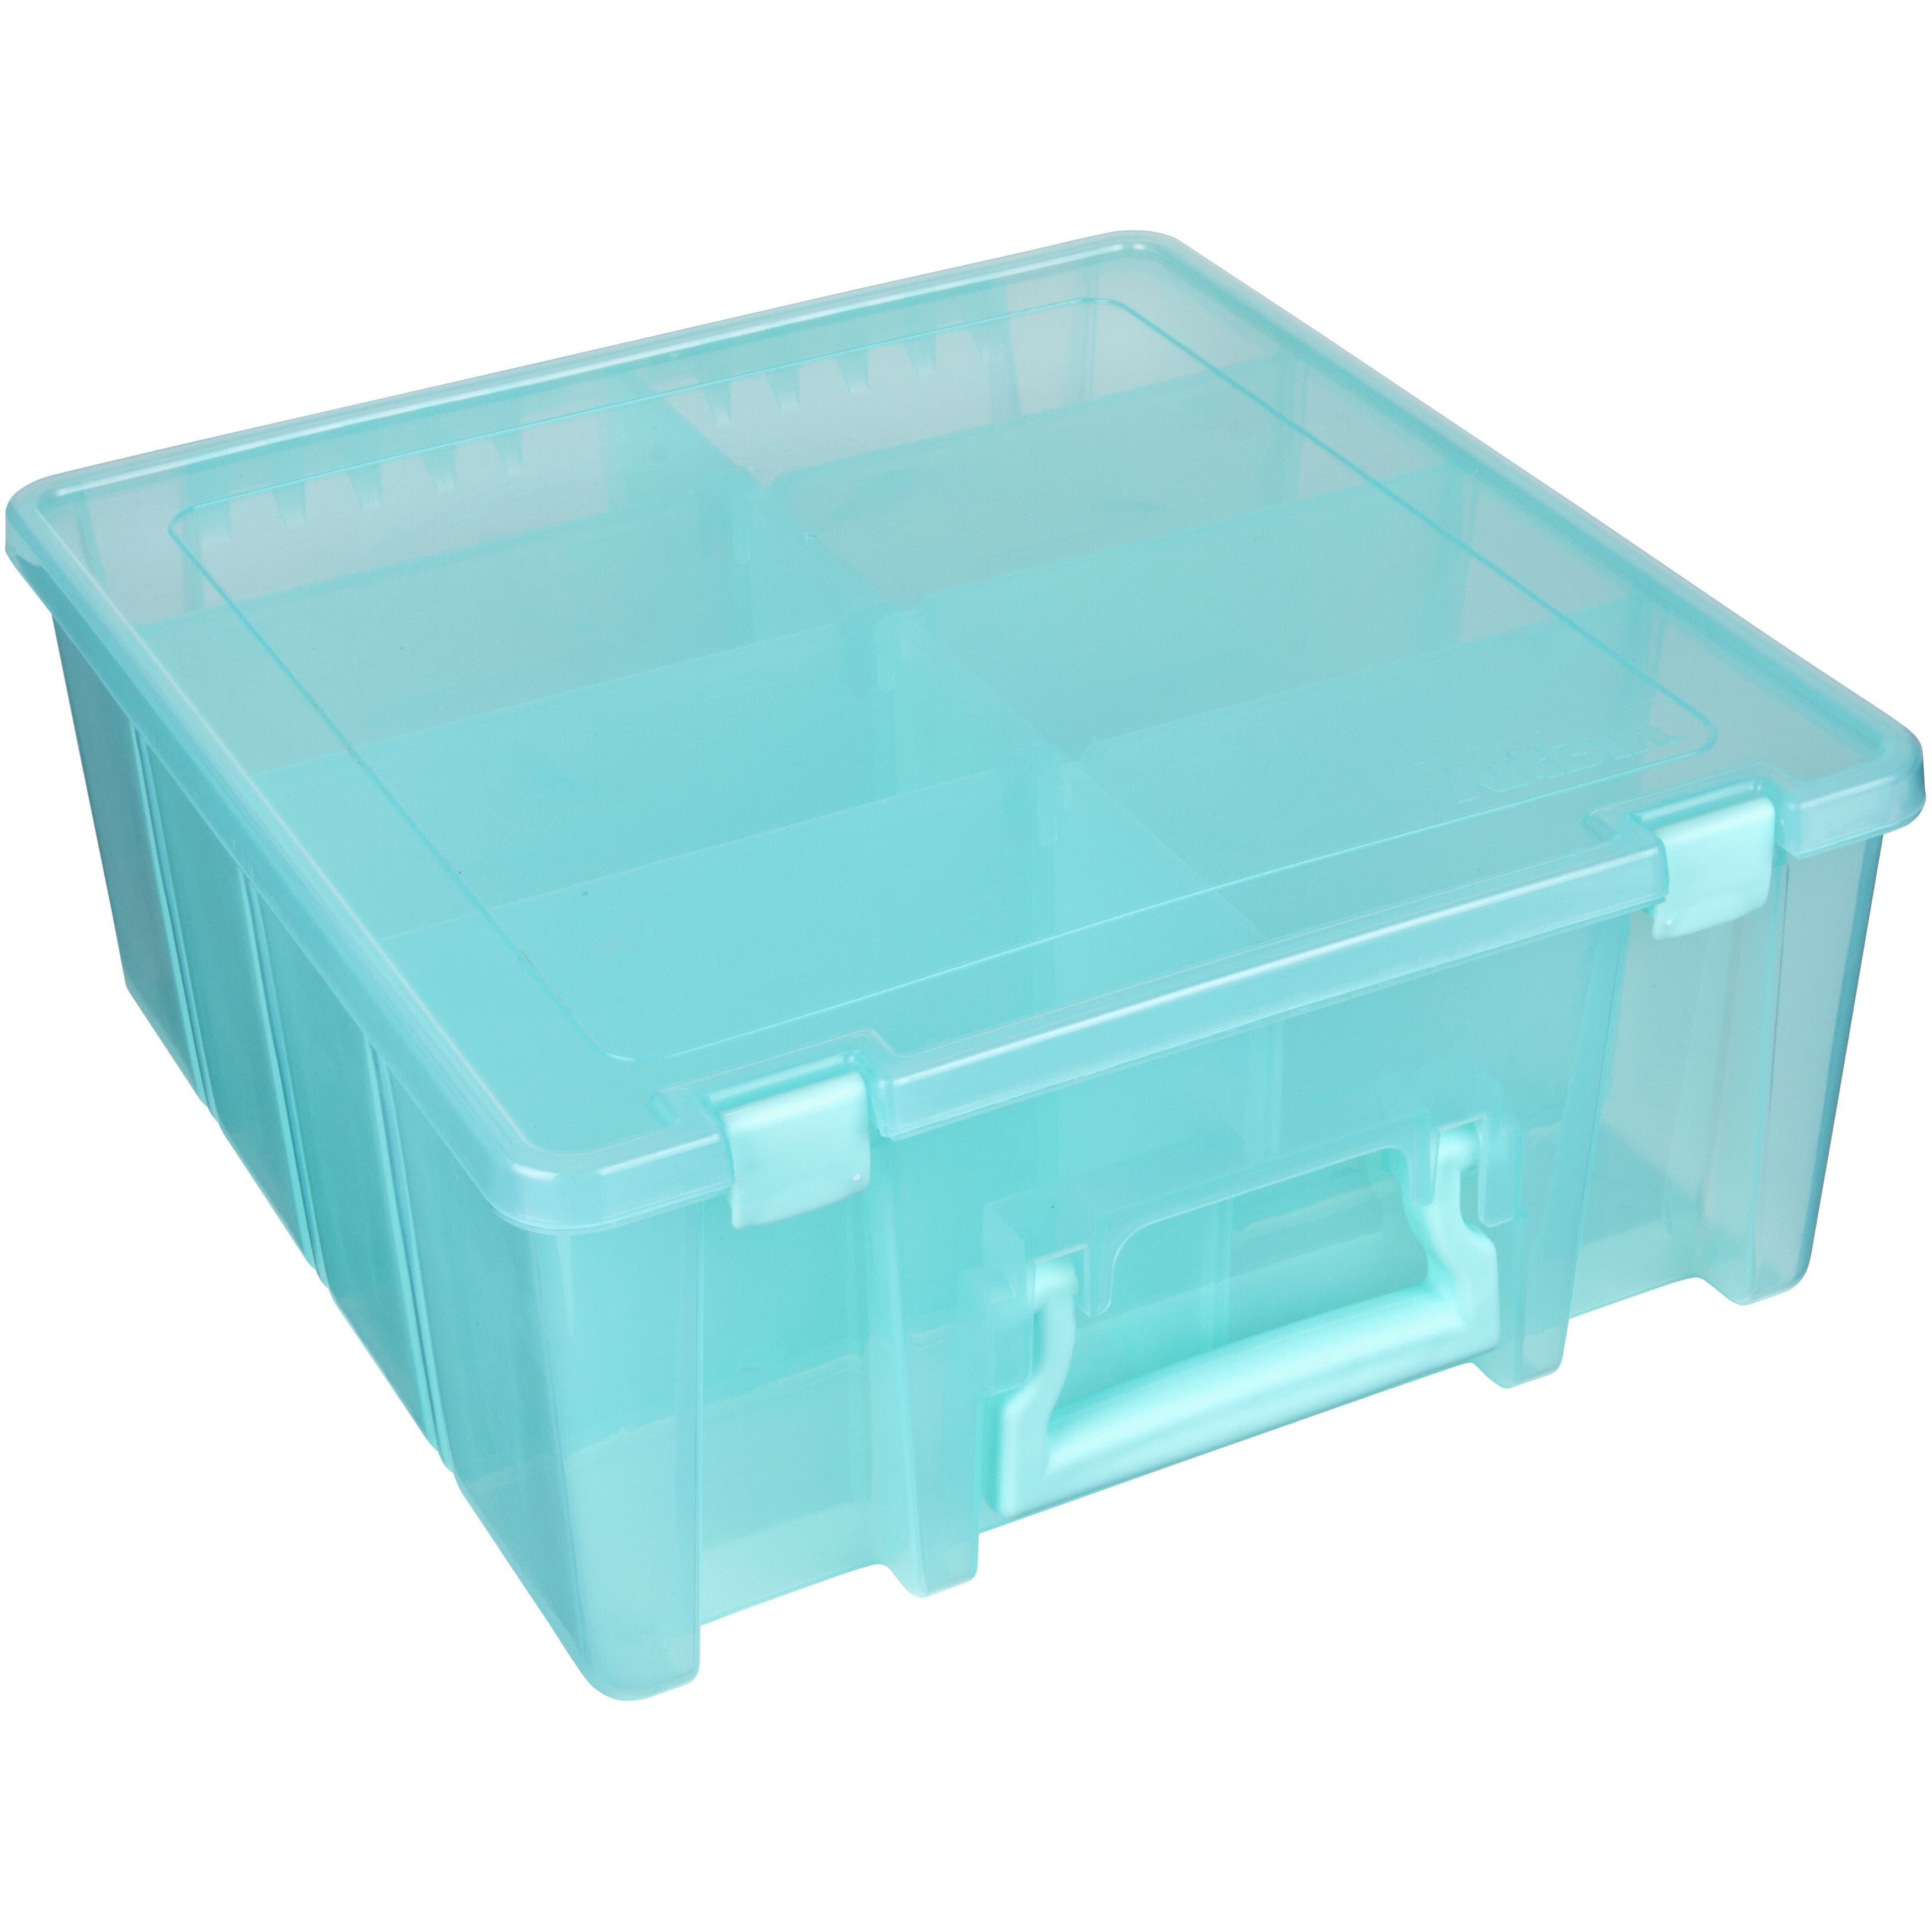 Clear Art and Craft Storage Container Box ArtBin Super Satchel Double Deep with Removable Dividers 6990RH Aqua Handle 